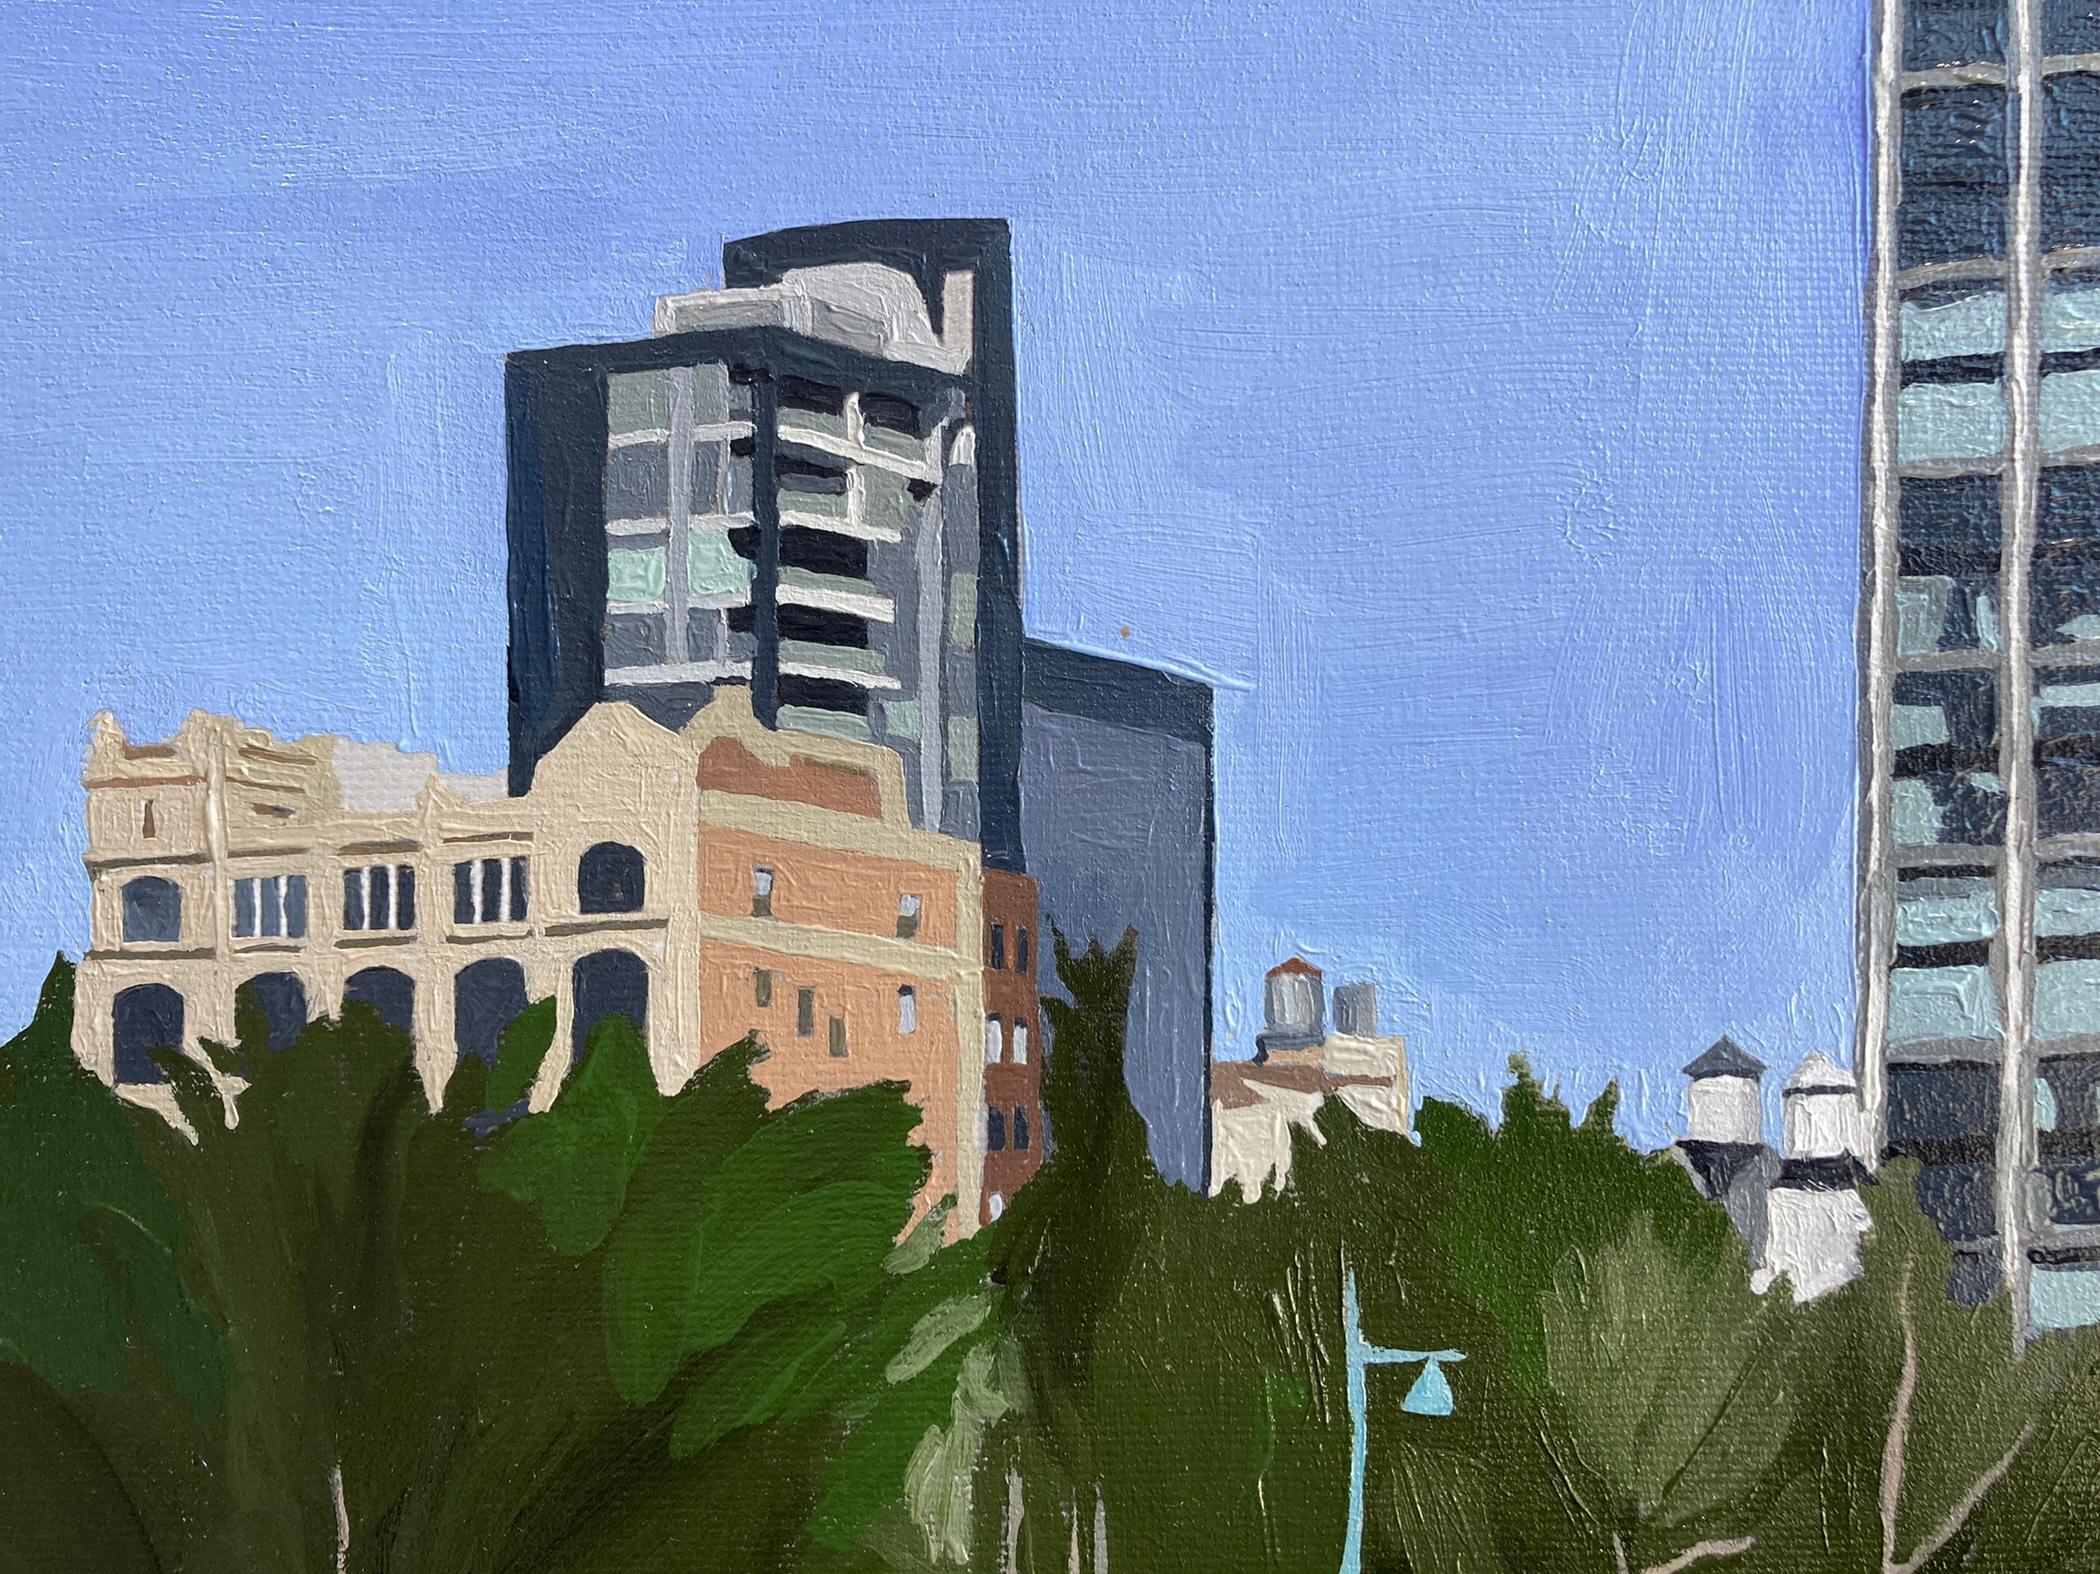 An oil painting of a grassy park, sky scrapers and trees along the horizon. In the foreground people lounge and relax in the sun. The flat simplified blocks of color in Baker's work brings to mind artists such as Richard Diebenkorn, Alex Katz and